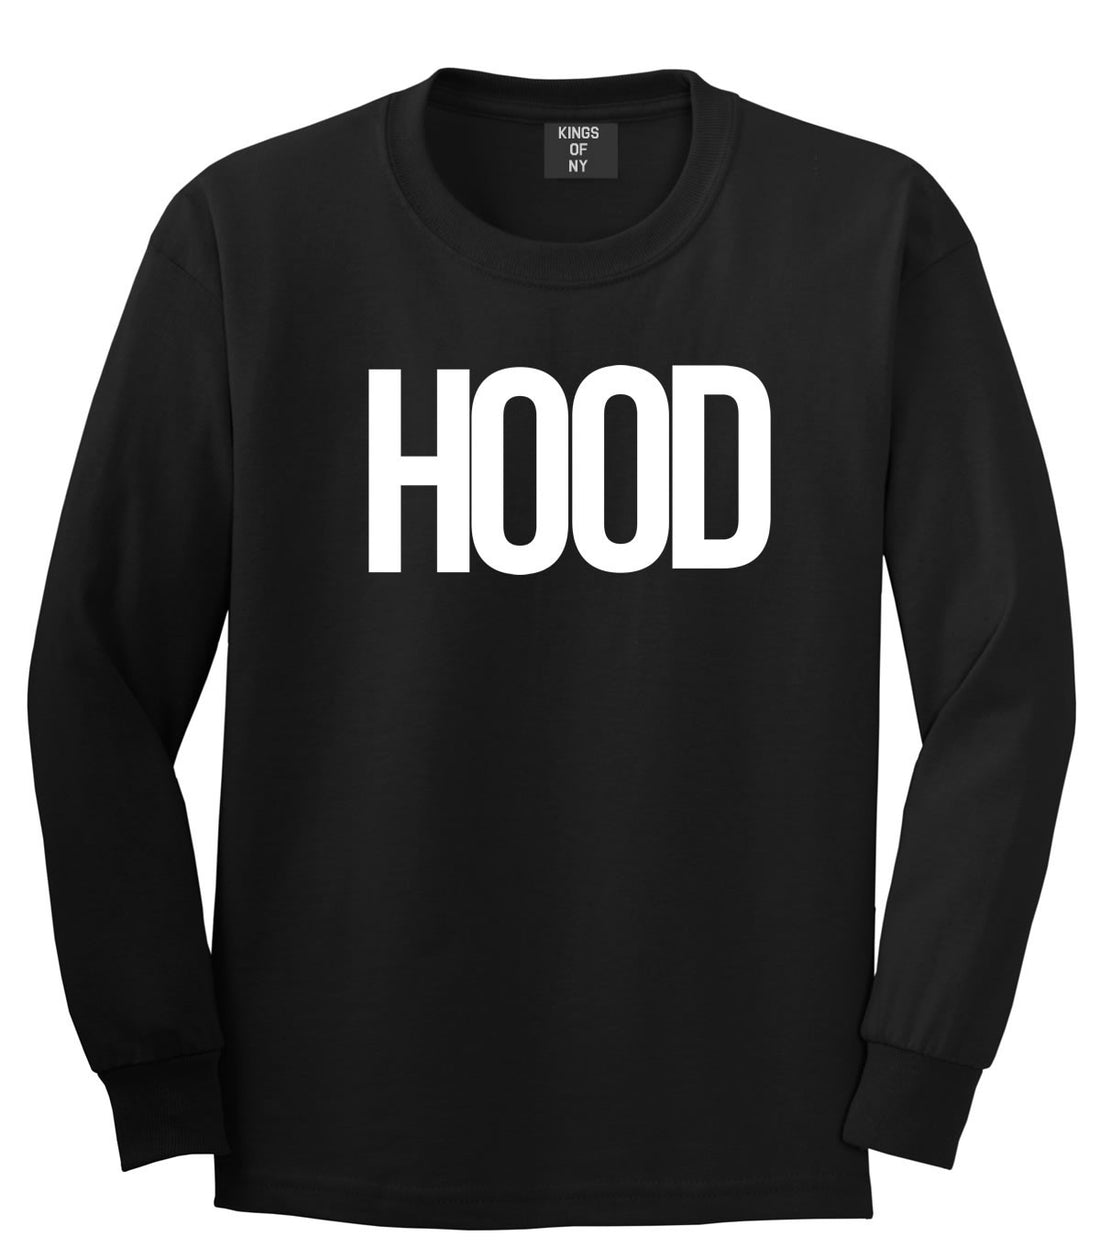 Hood Trap Style Compton New York Air Long Sleeve Boys Kids T-Shirt In Black by Kings Of NY